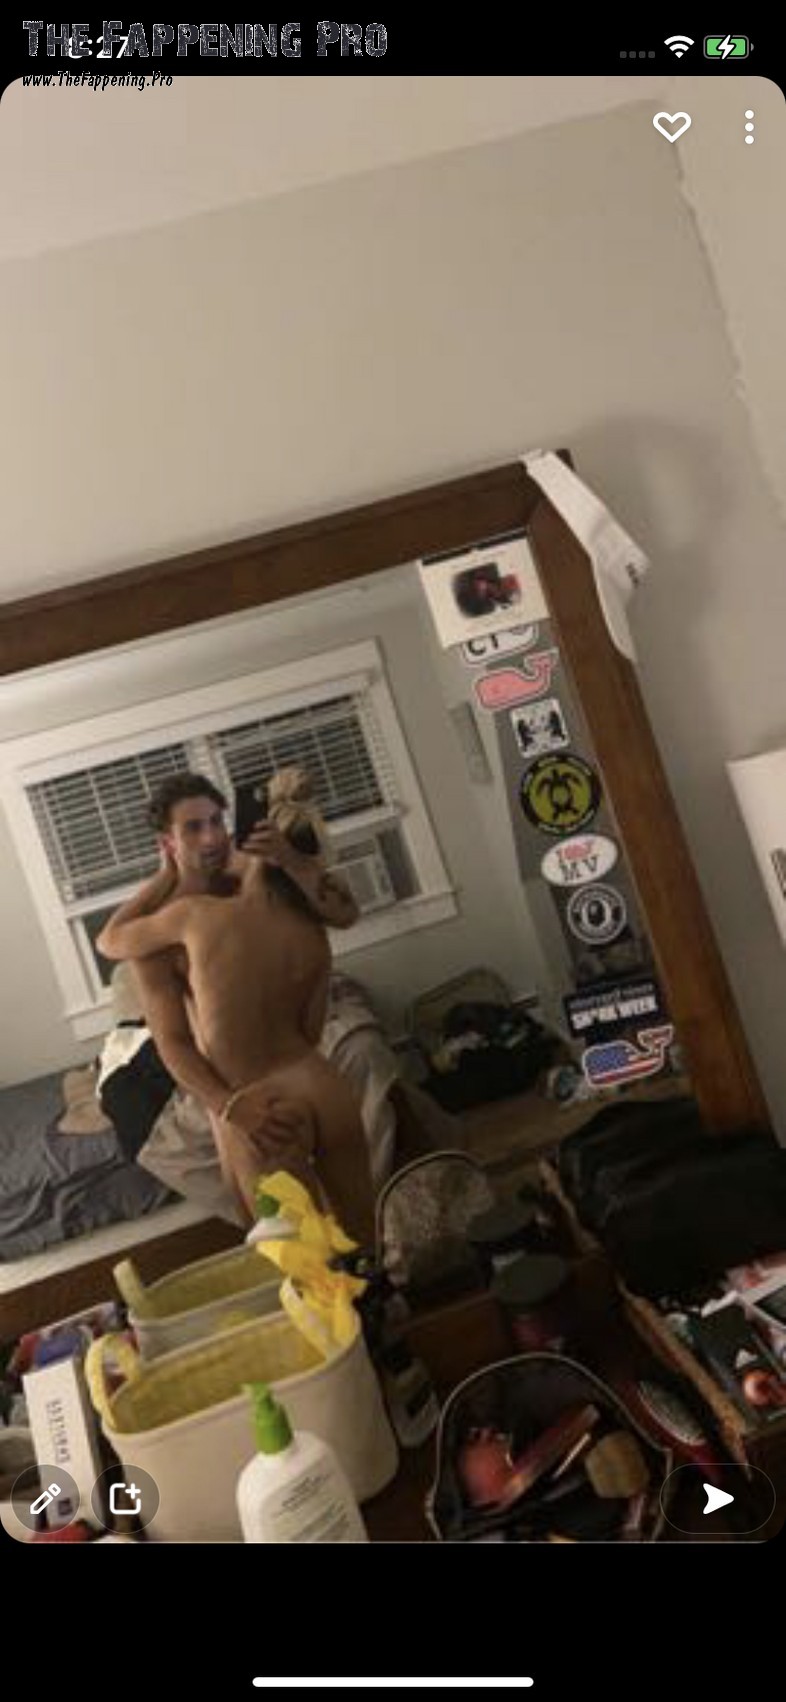 Overtime Megan Nude Leaked TheFappening.Pro 145 - Megan Eugenio aka Overtime Megan Nude TikTok Star From Massachusetts (Over 100 Leaked Photos)